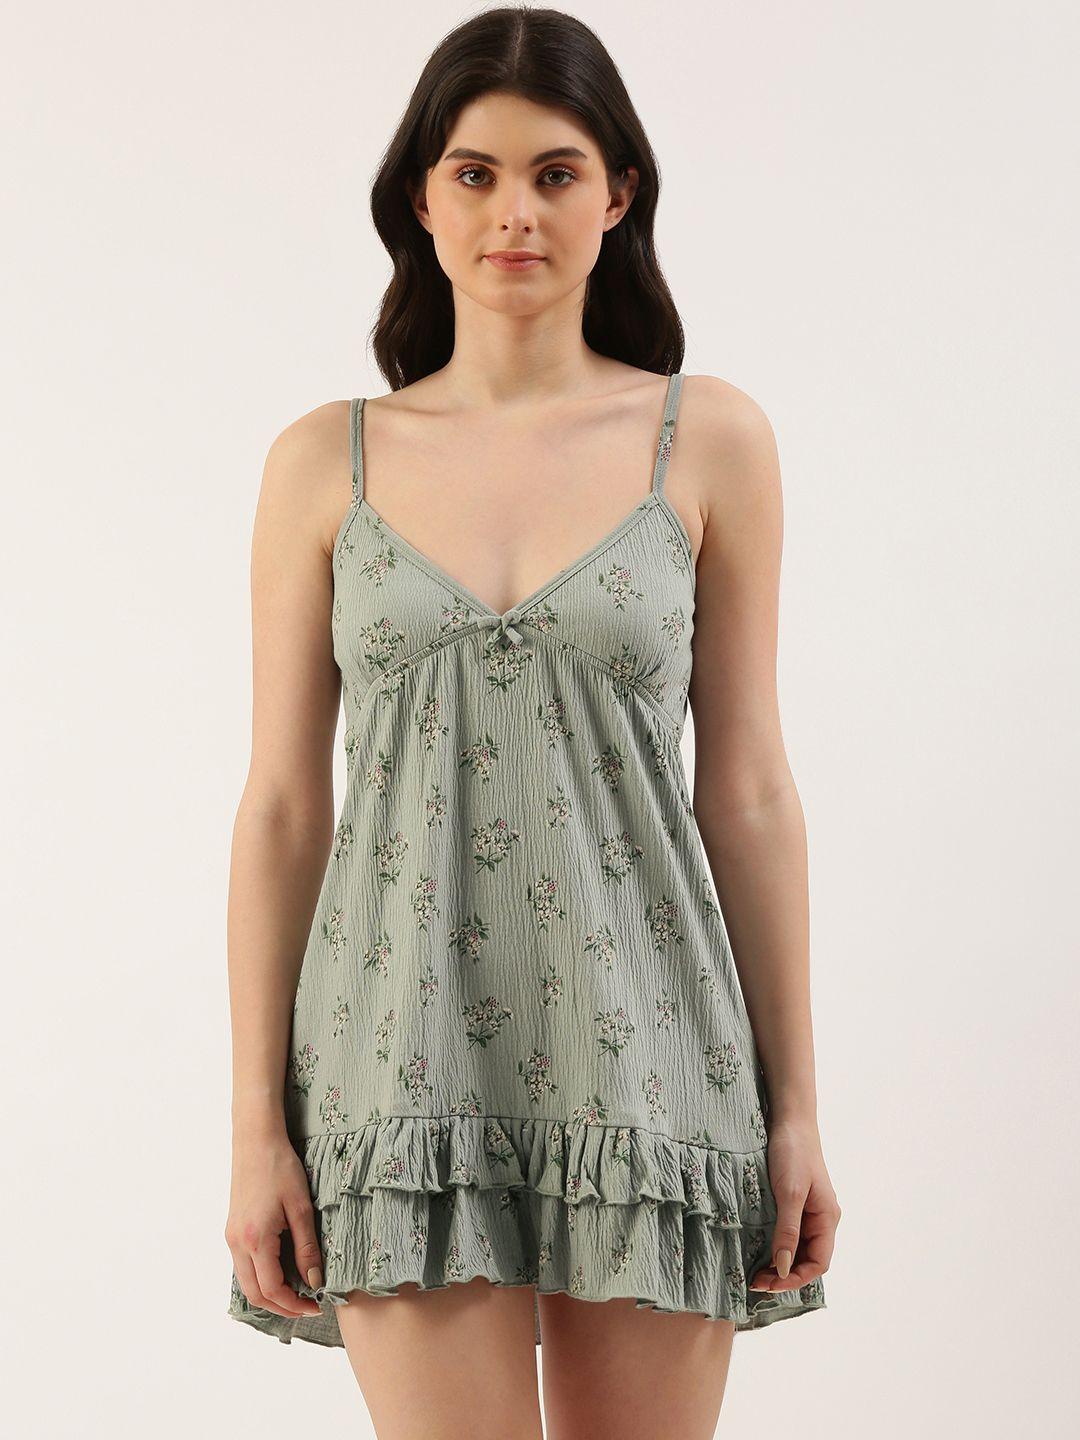 clt-s-floral-printed-pure-cotton-nightdress